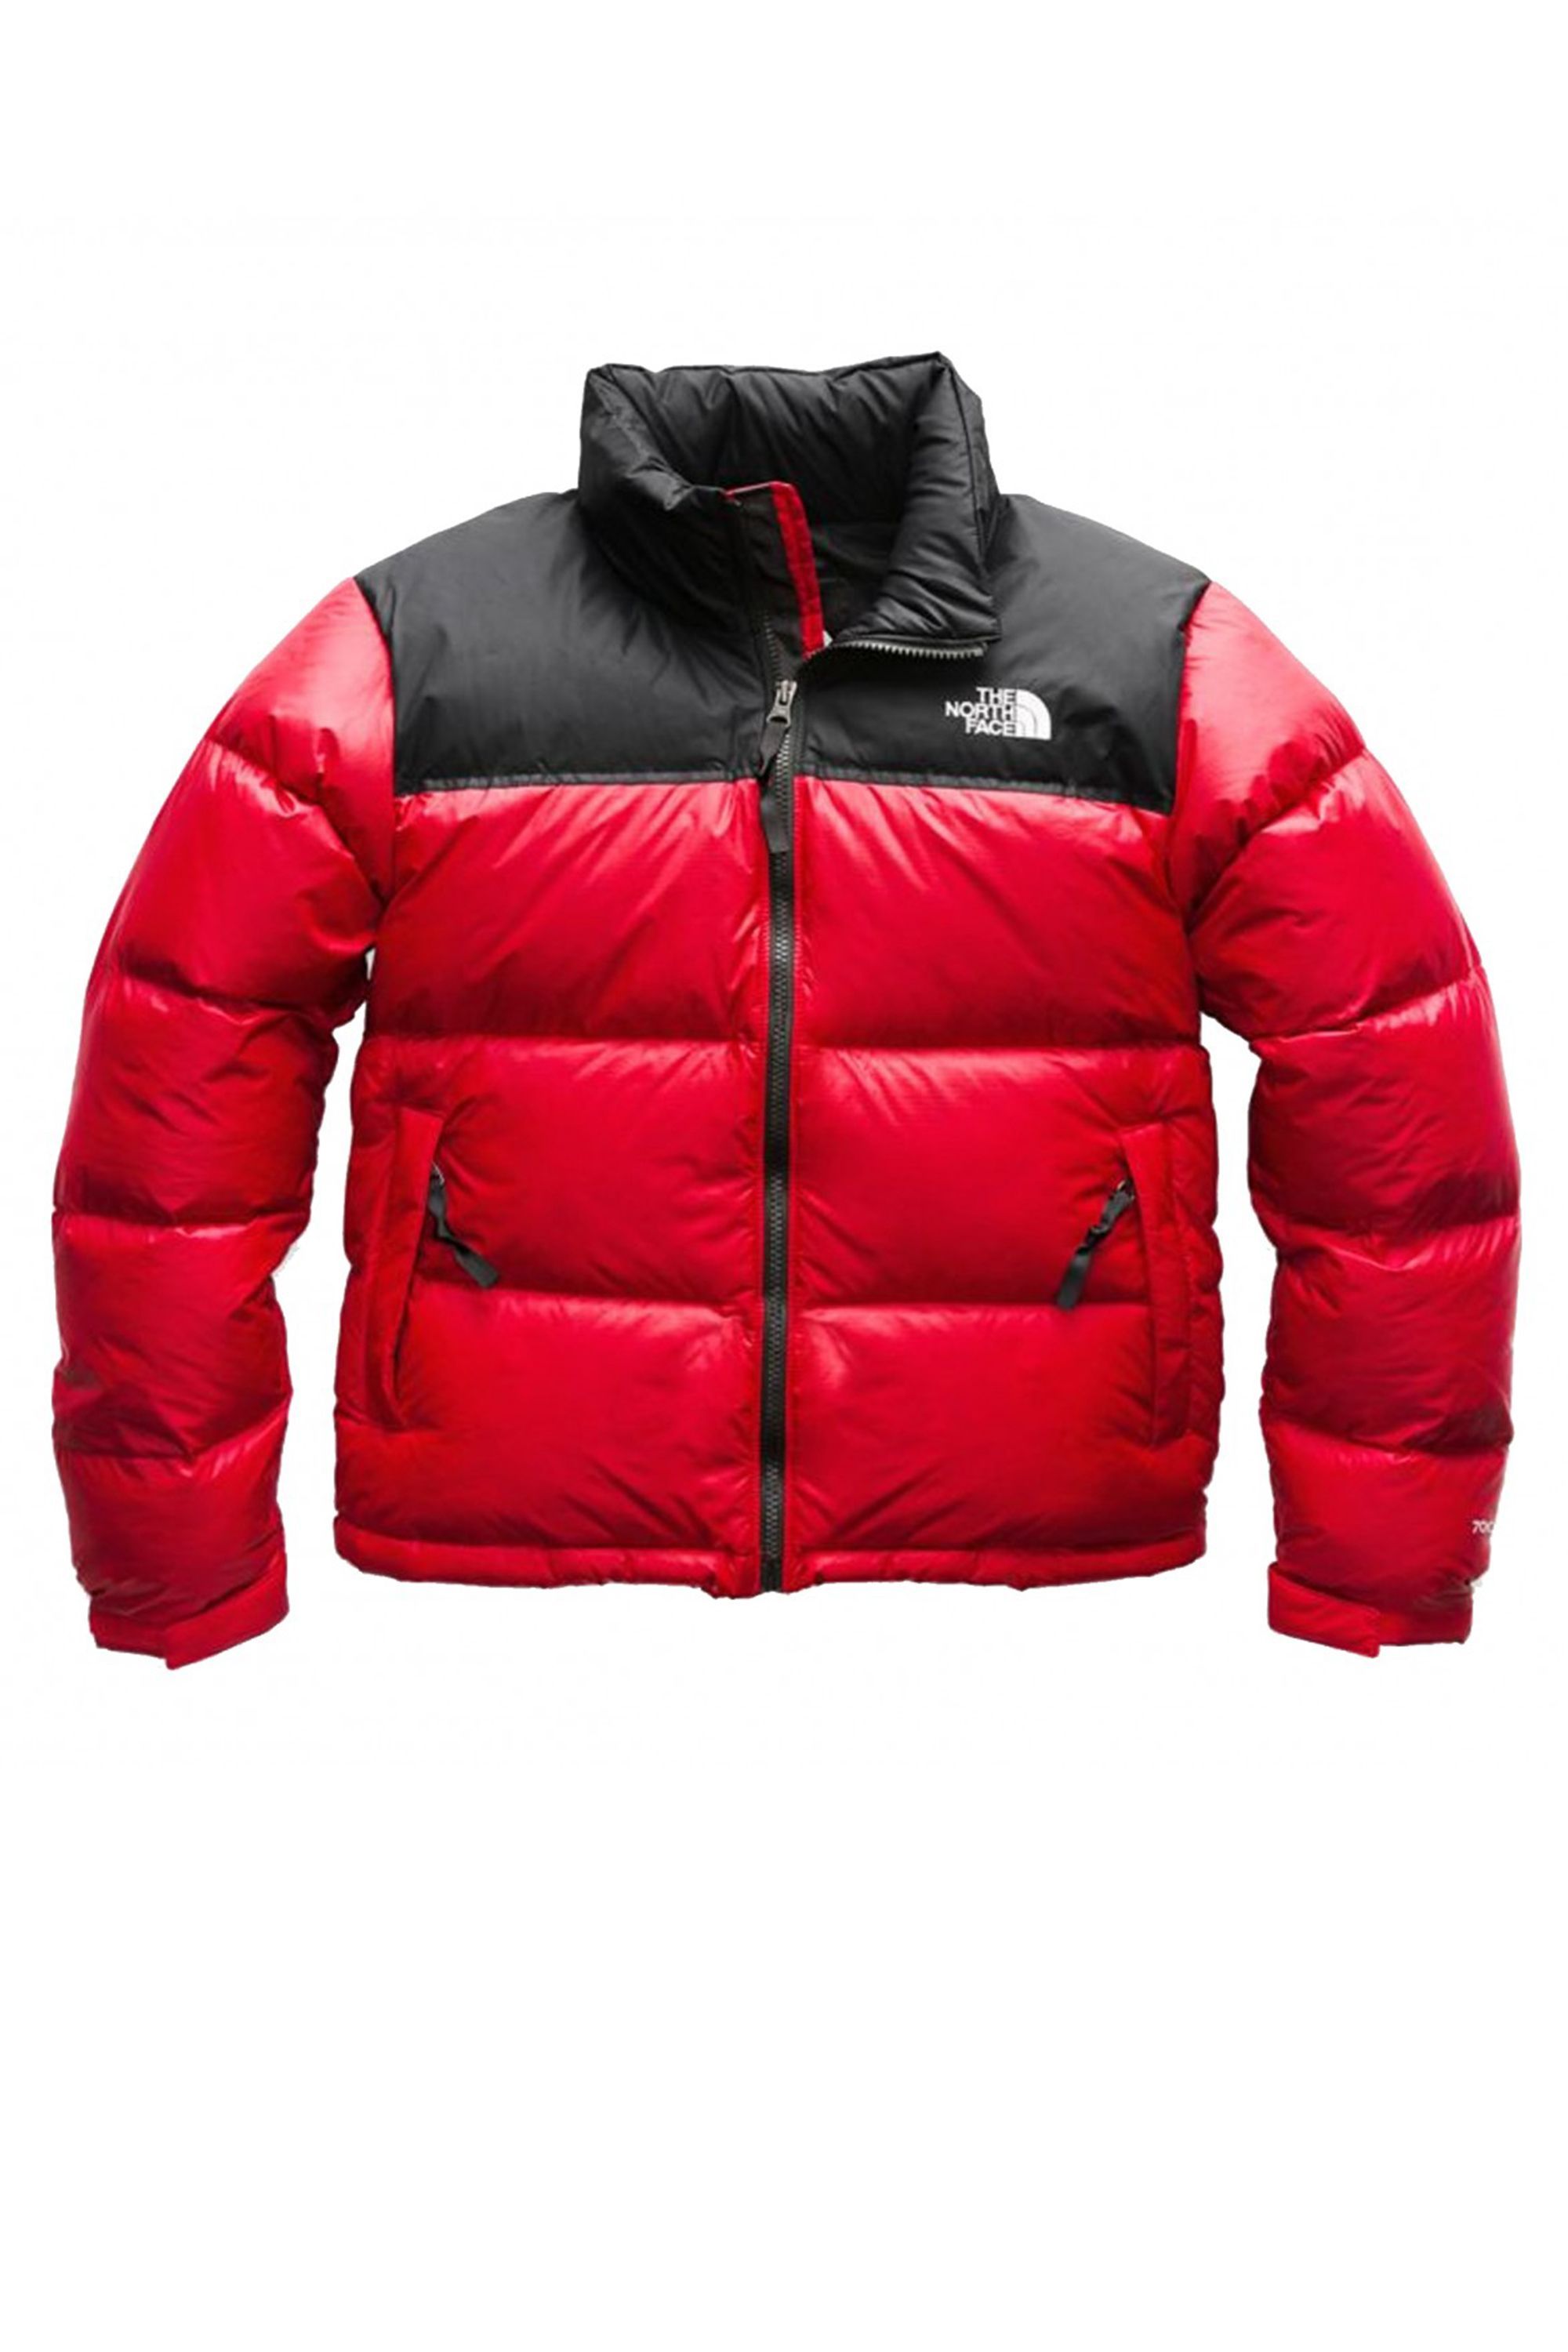 north face red bubble jacket